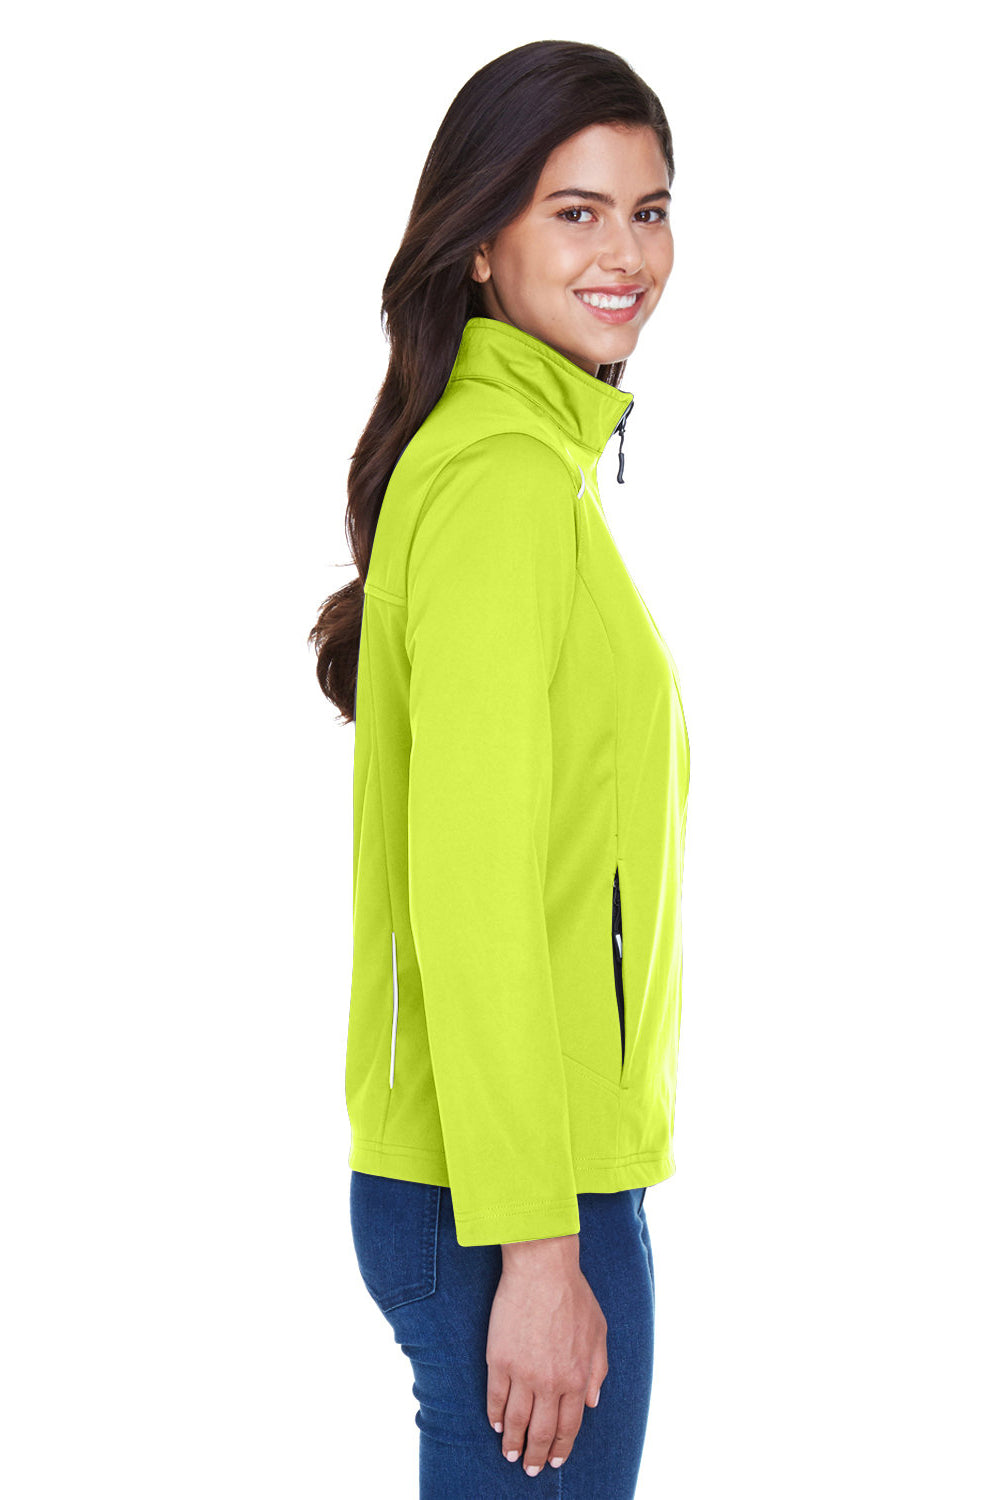 Core 365 CE708W Womens Techno Lite Water Resistant Full Zip Jacket Safety Yellow SIde